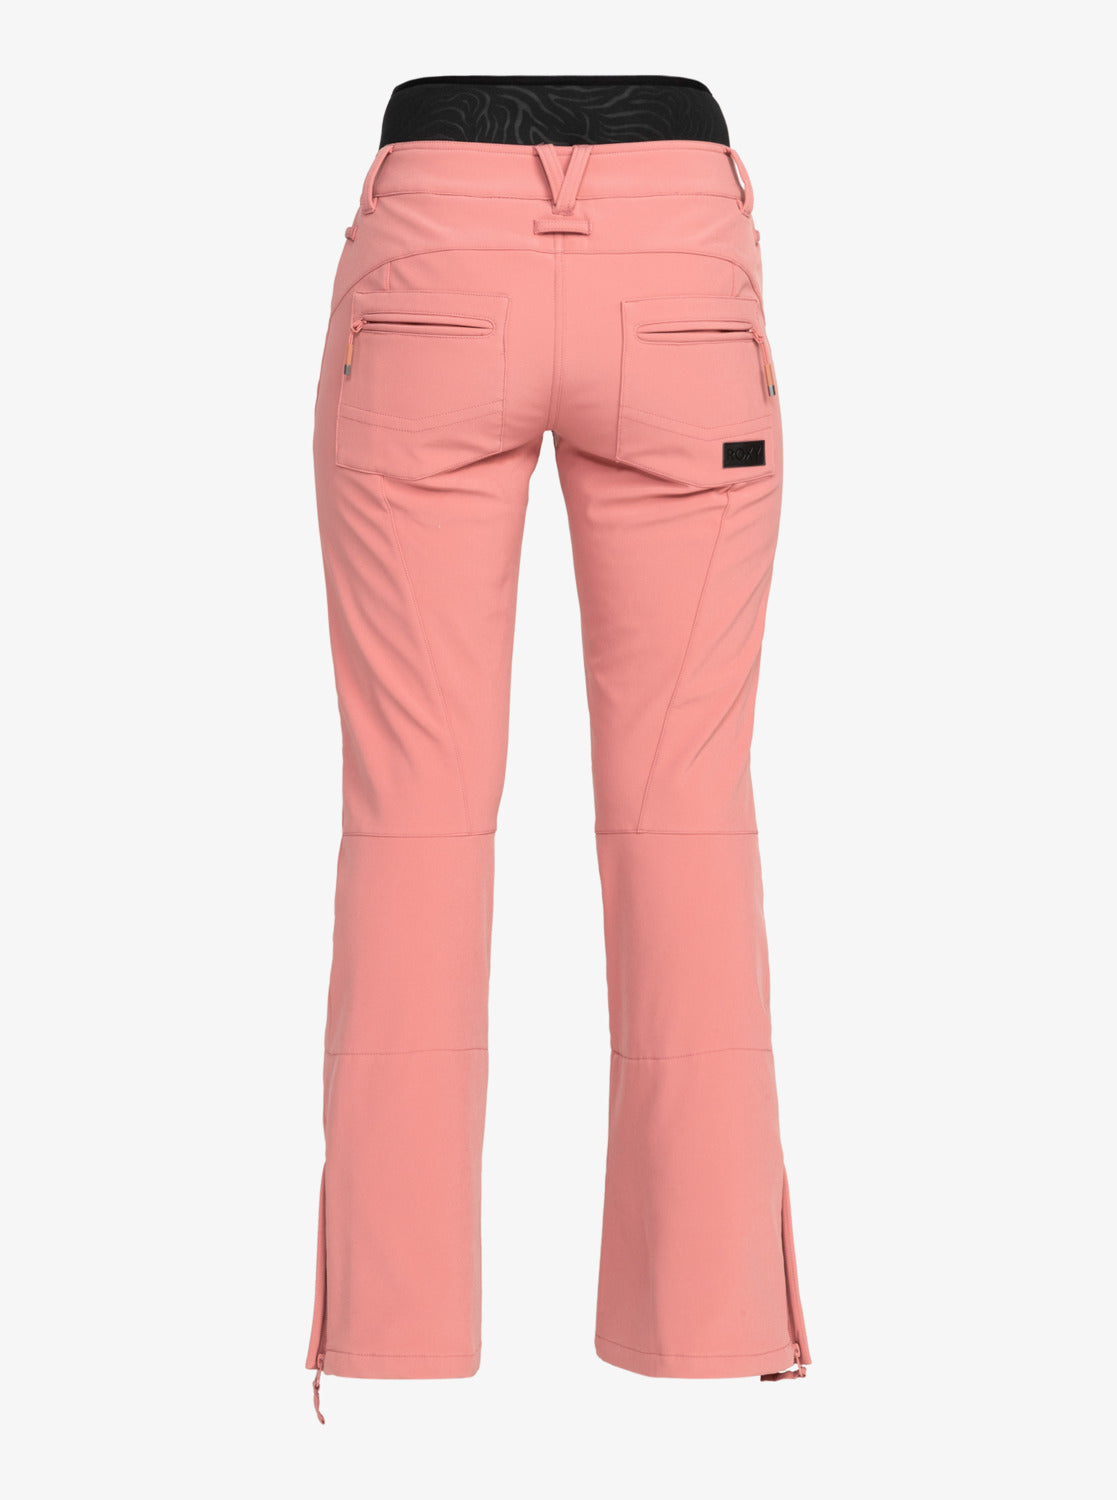 Roxy Womens Rising High Technical Snow Pants Dusty Rose